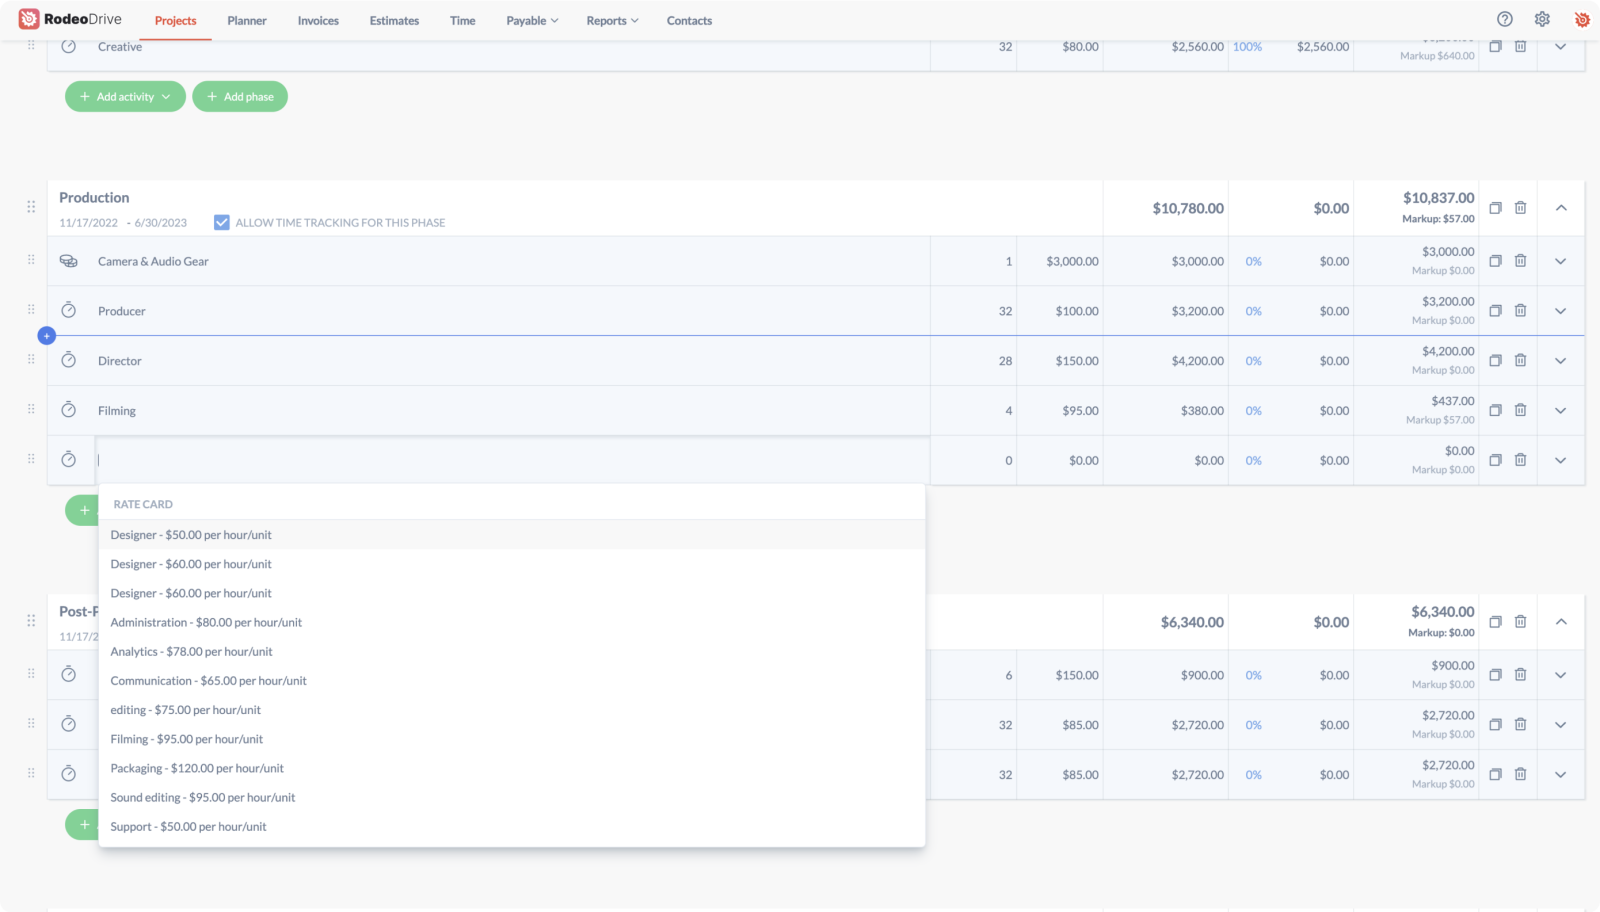 Screenshot of Rodeo's budgeting feature